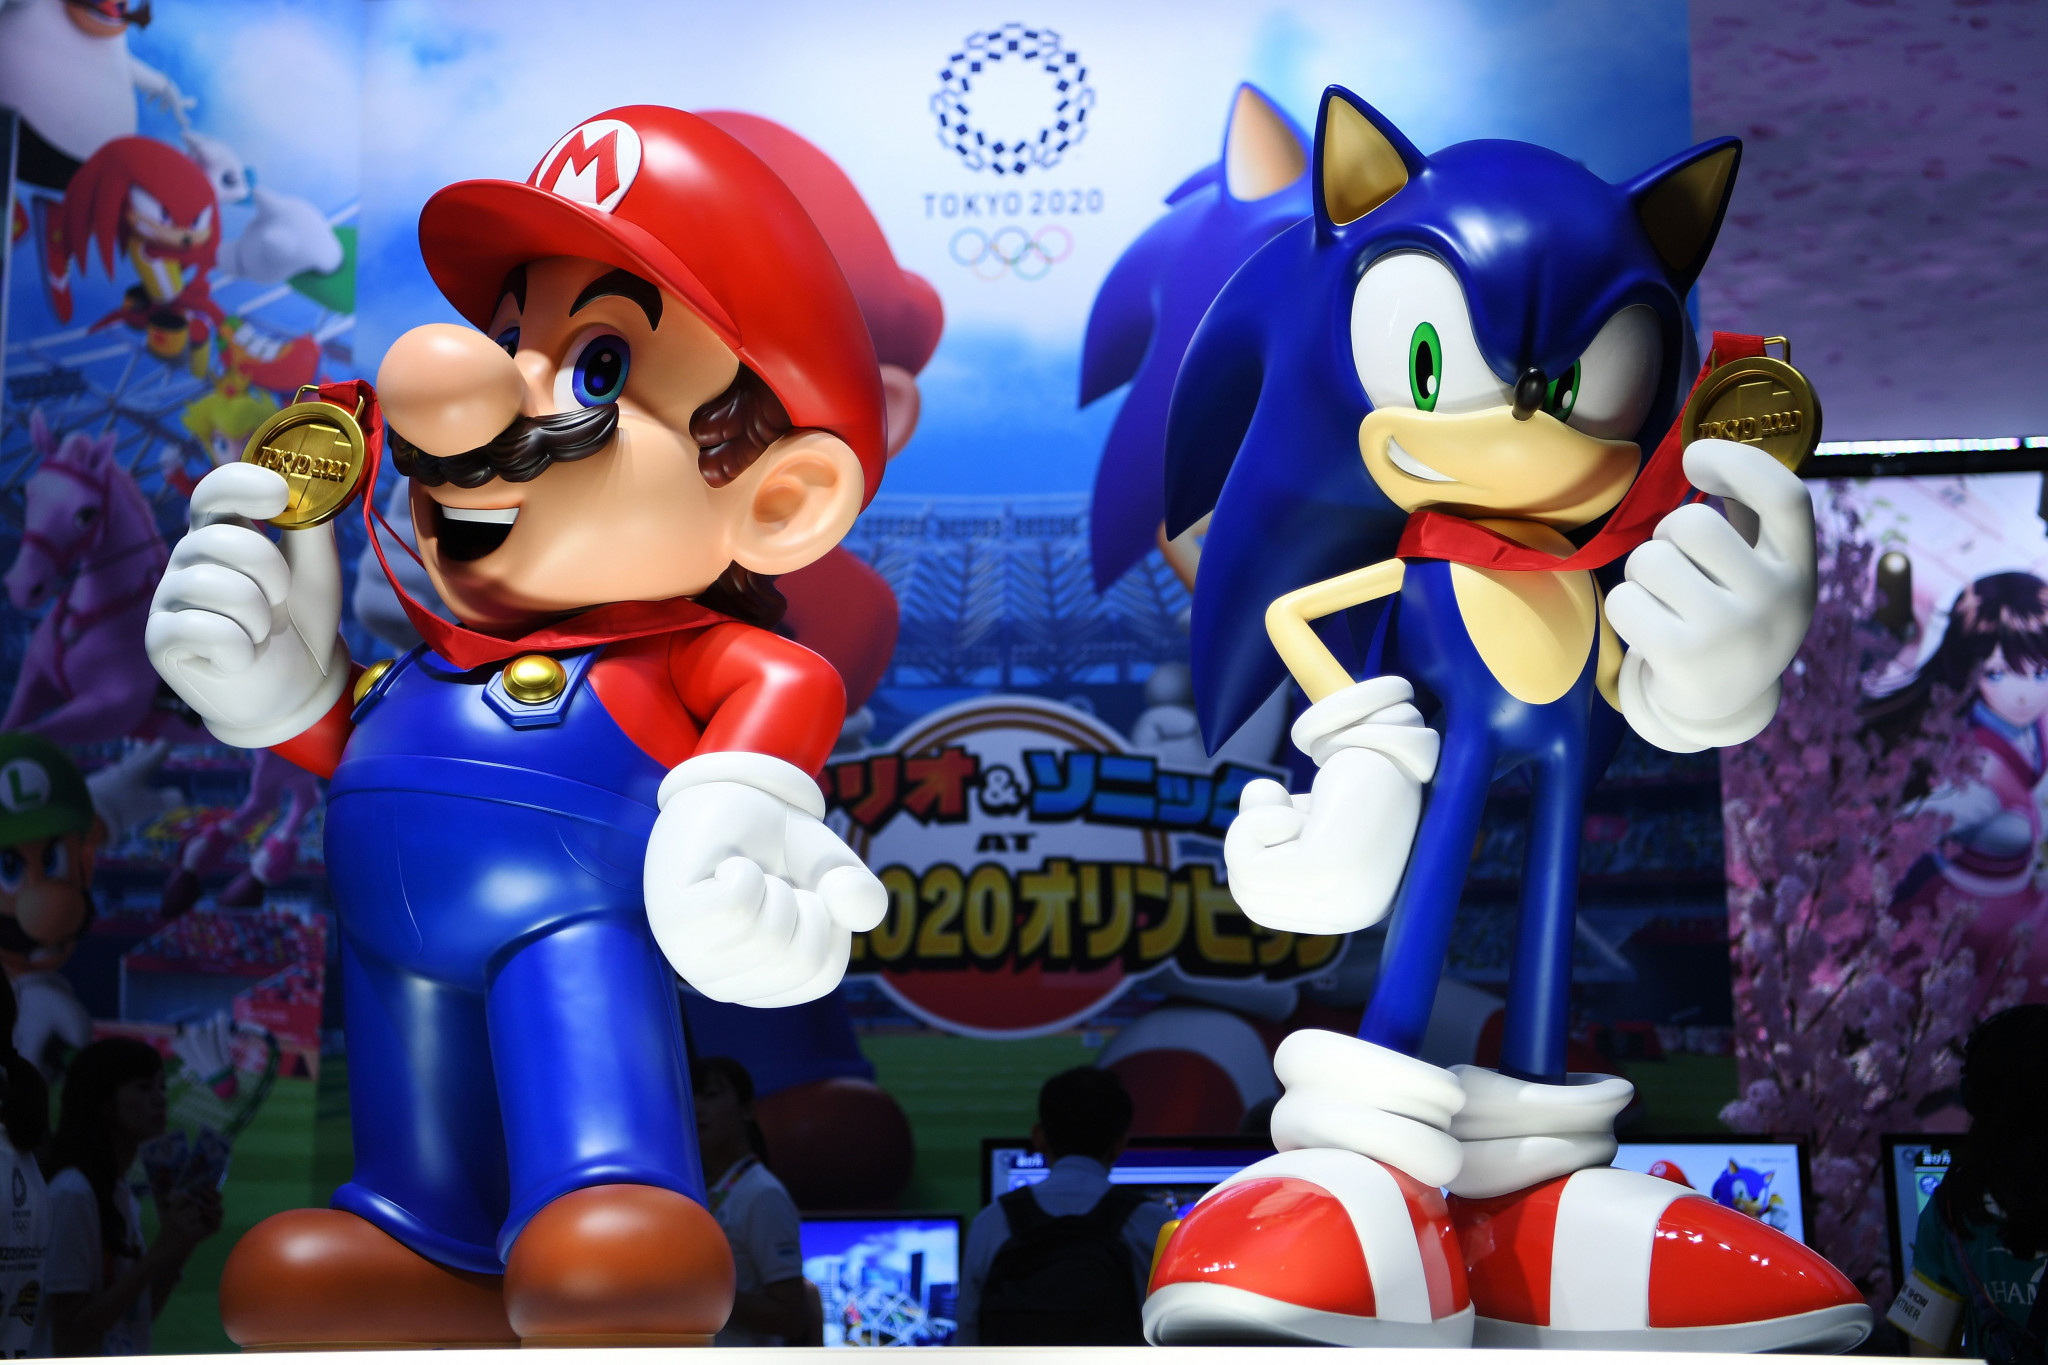 Gaming giants Sega advert reveals planning new Mario and Sonic release for Paris 2024